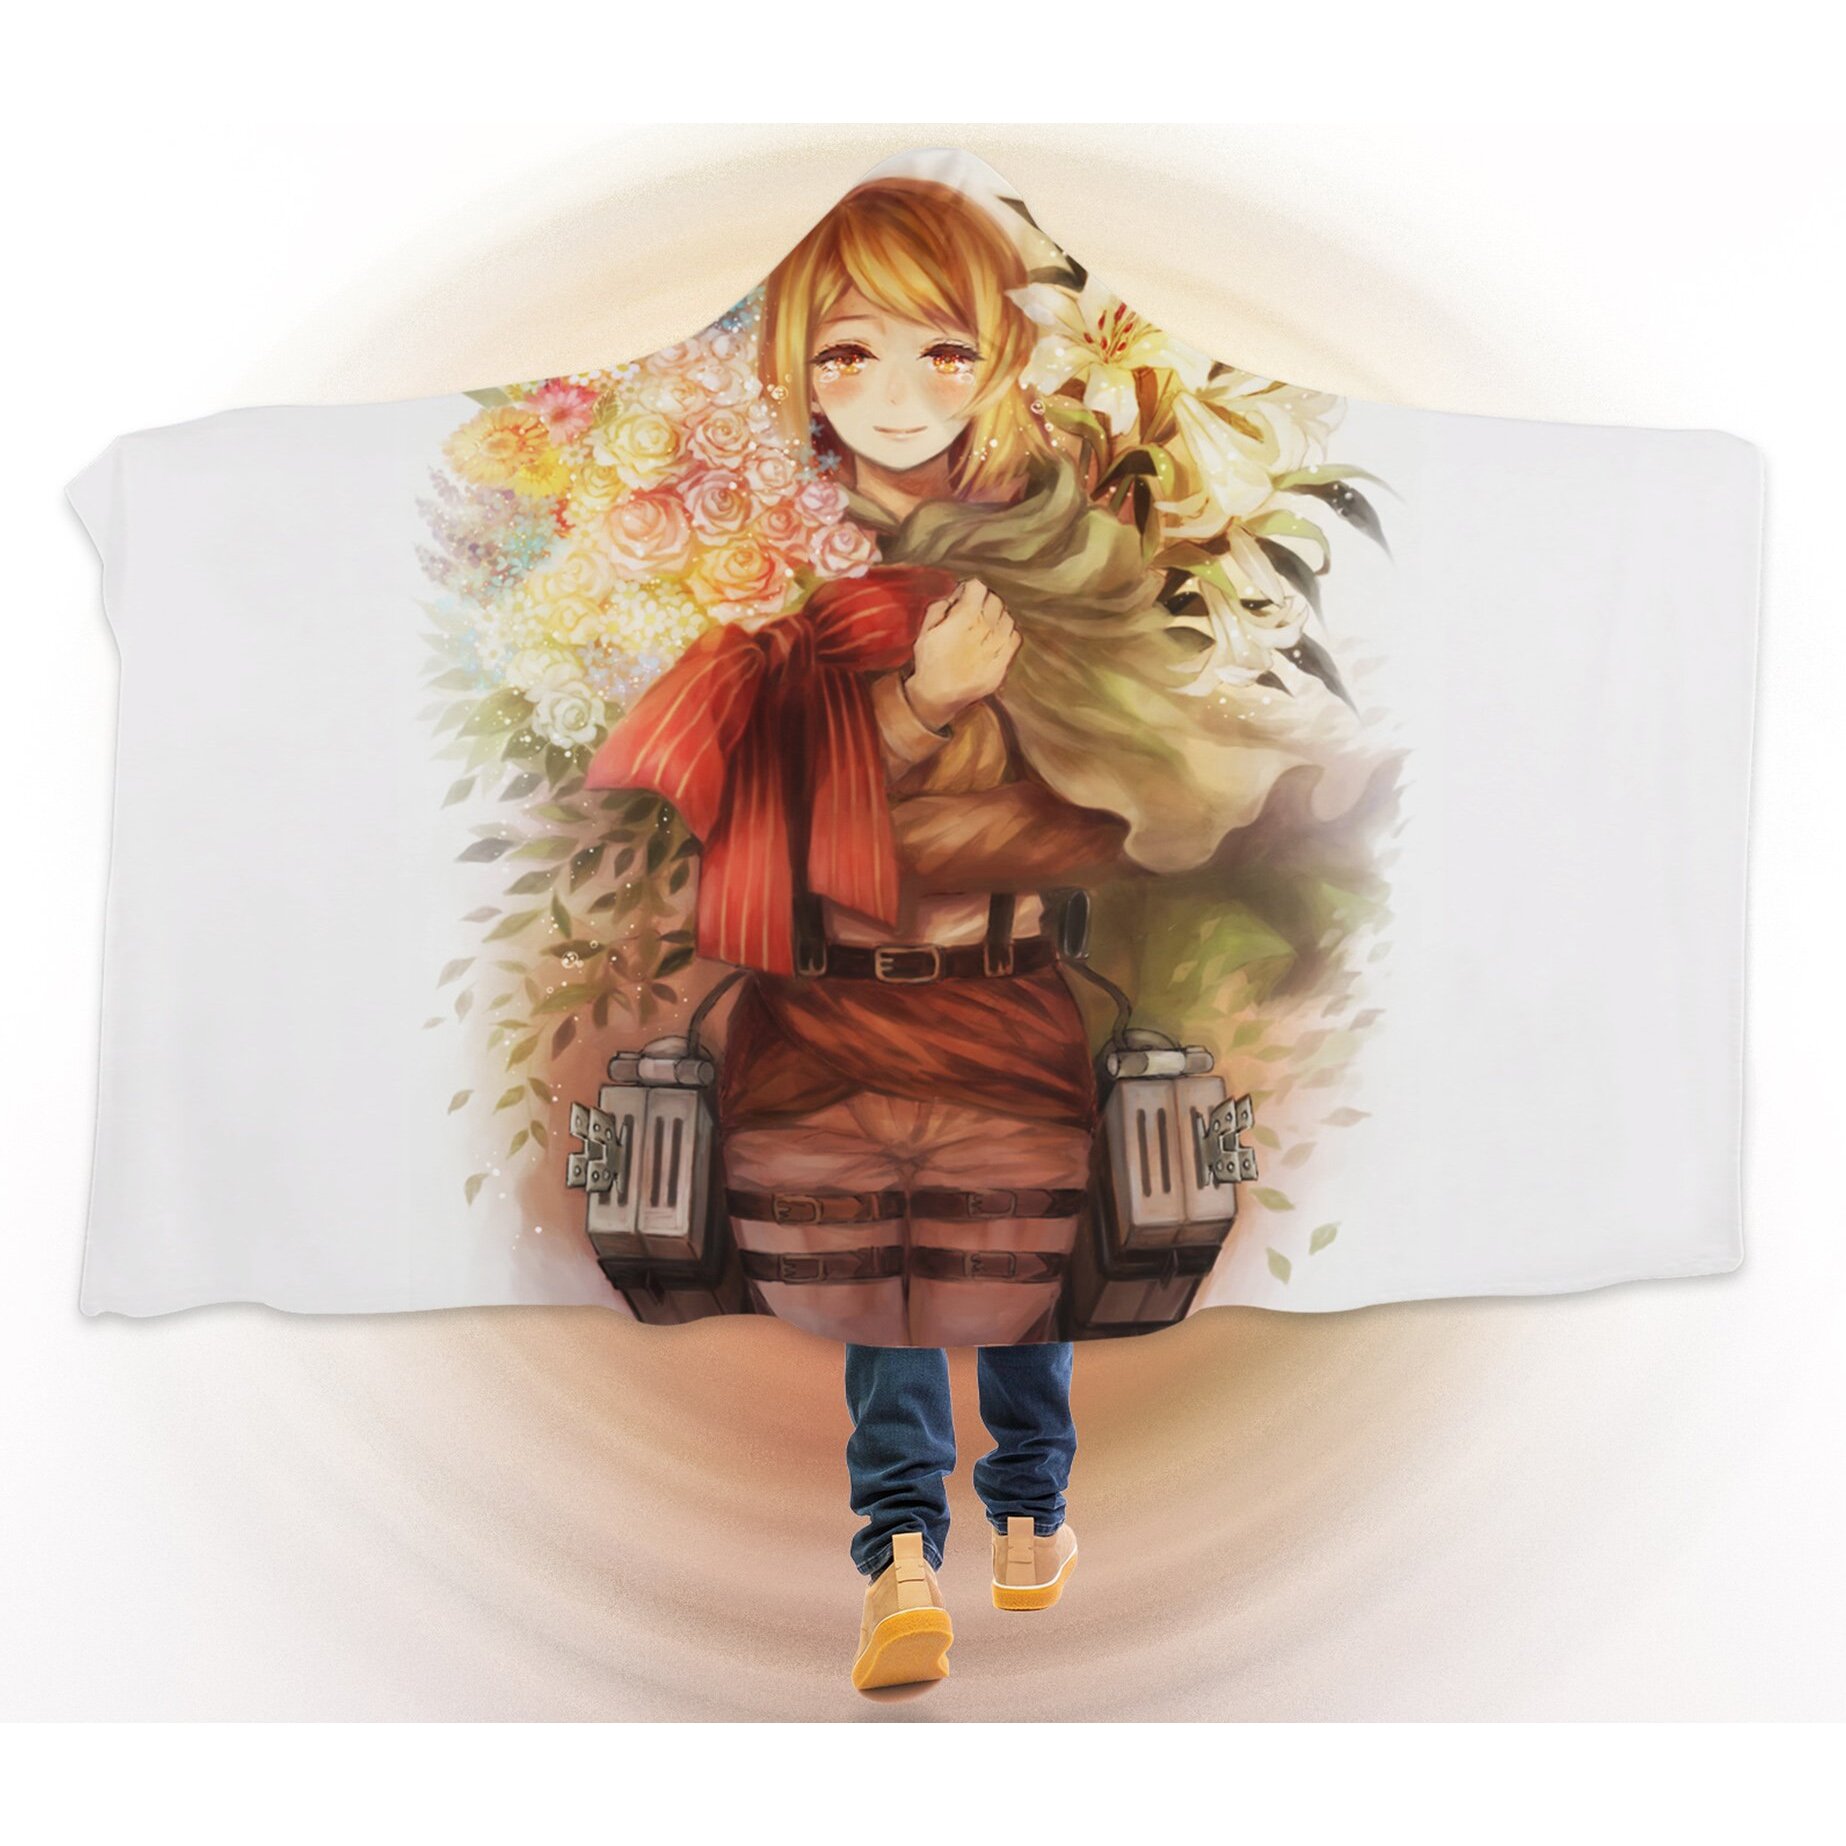 3D Attack On Titan 329 Anime Hooded Blanket Cloak Japan Anime Cosplay Game